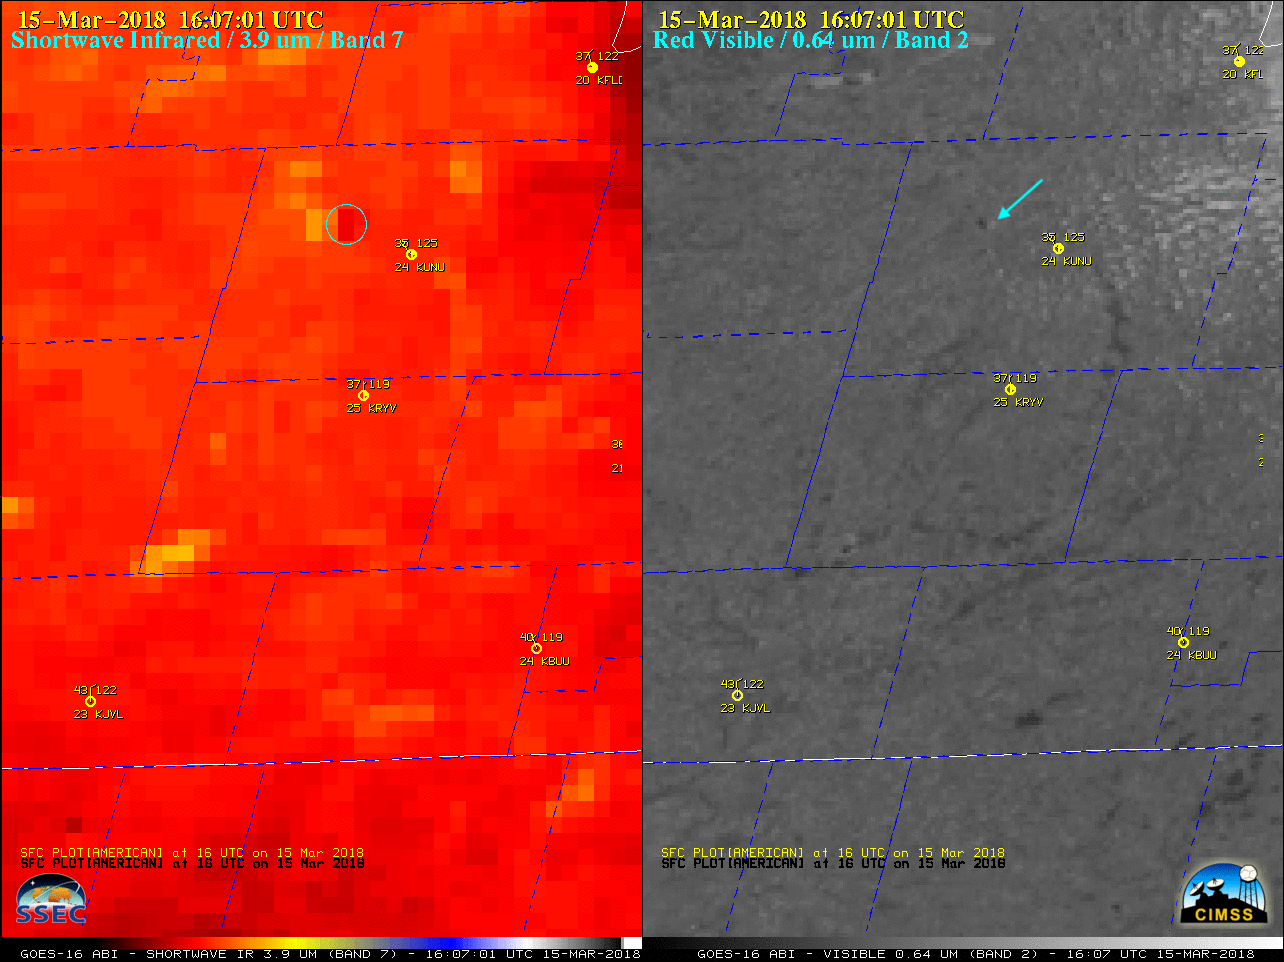 GOES-16 Shortwave Infrared (3.9 µm, left) and 